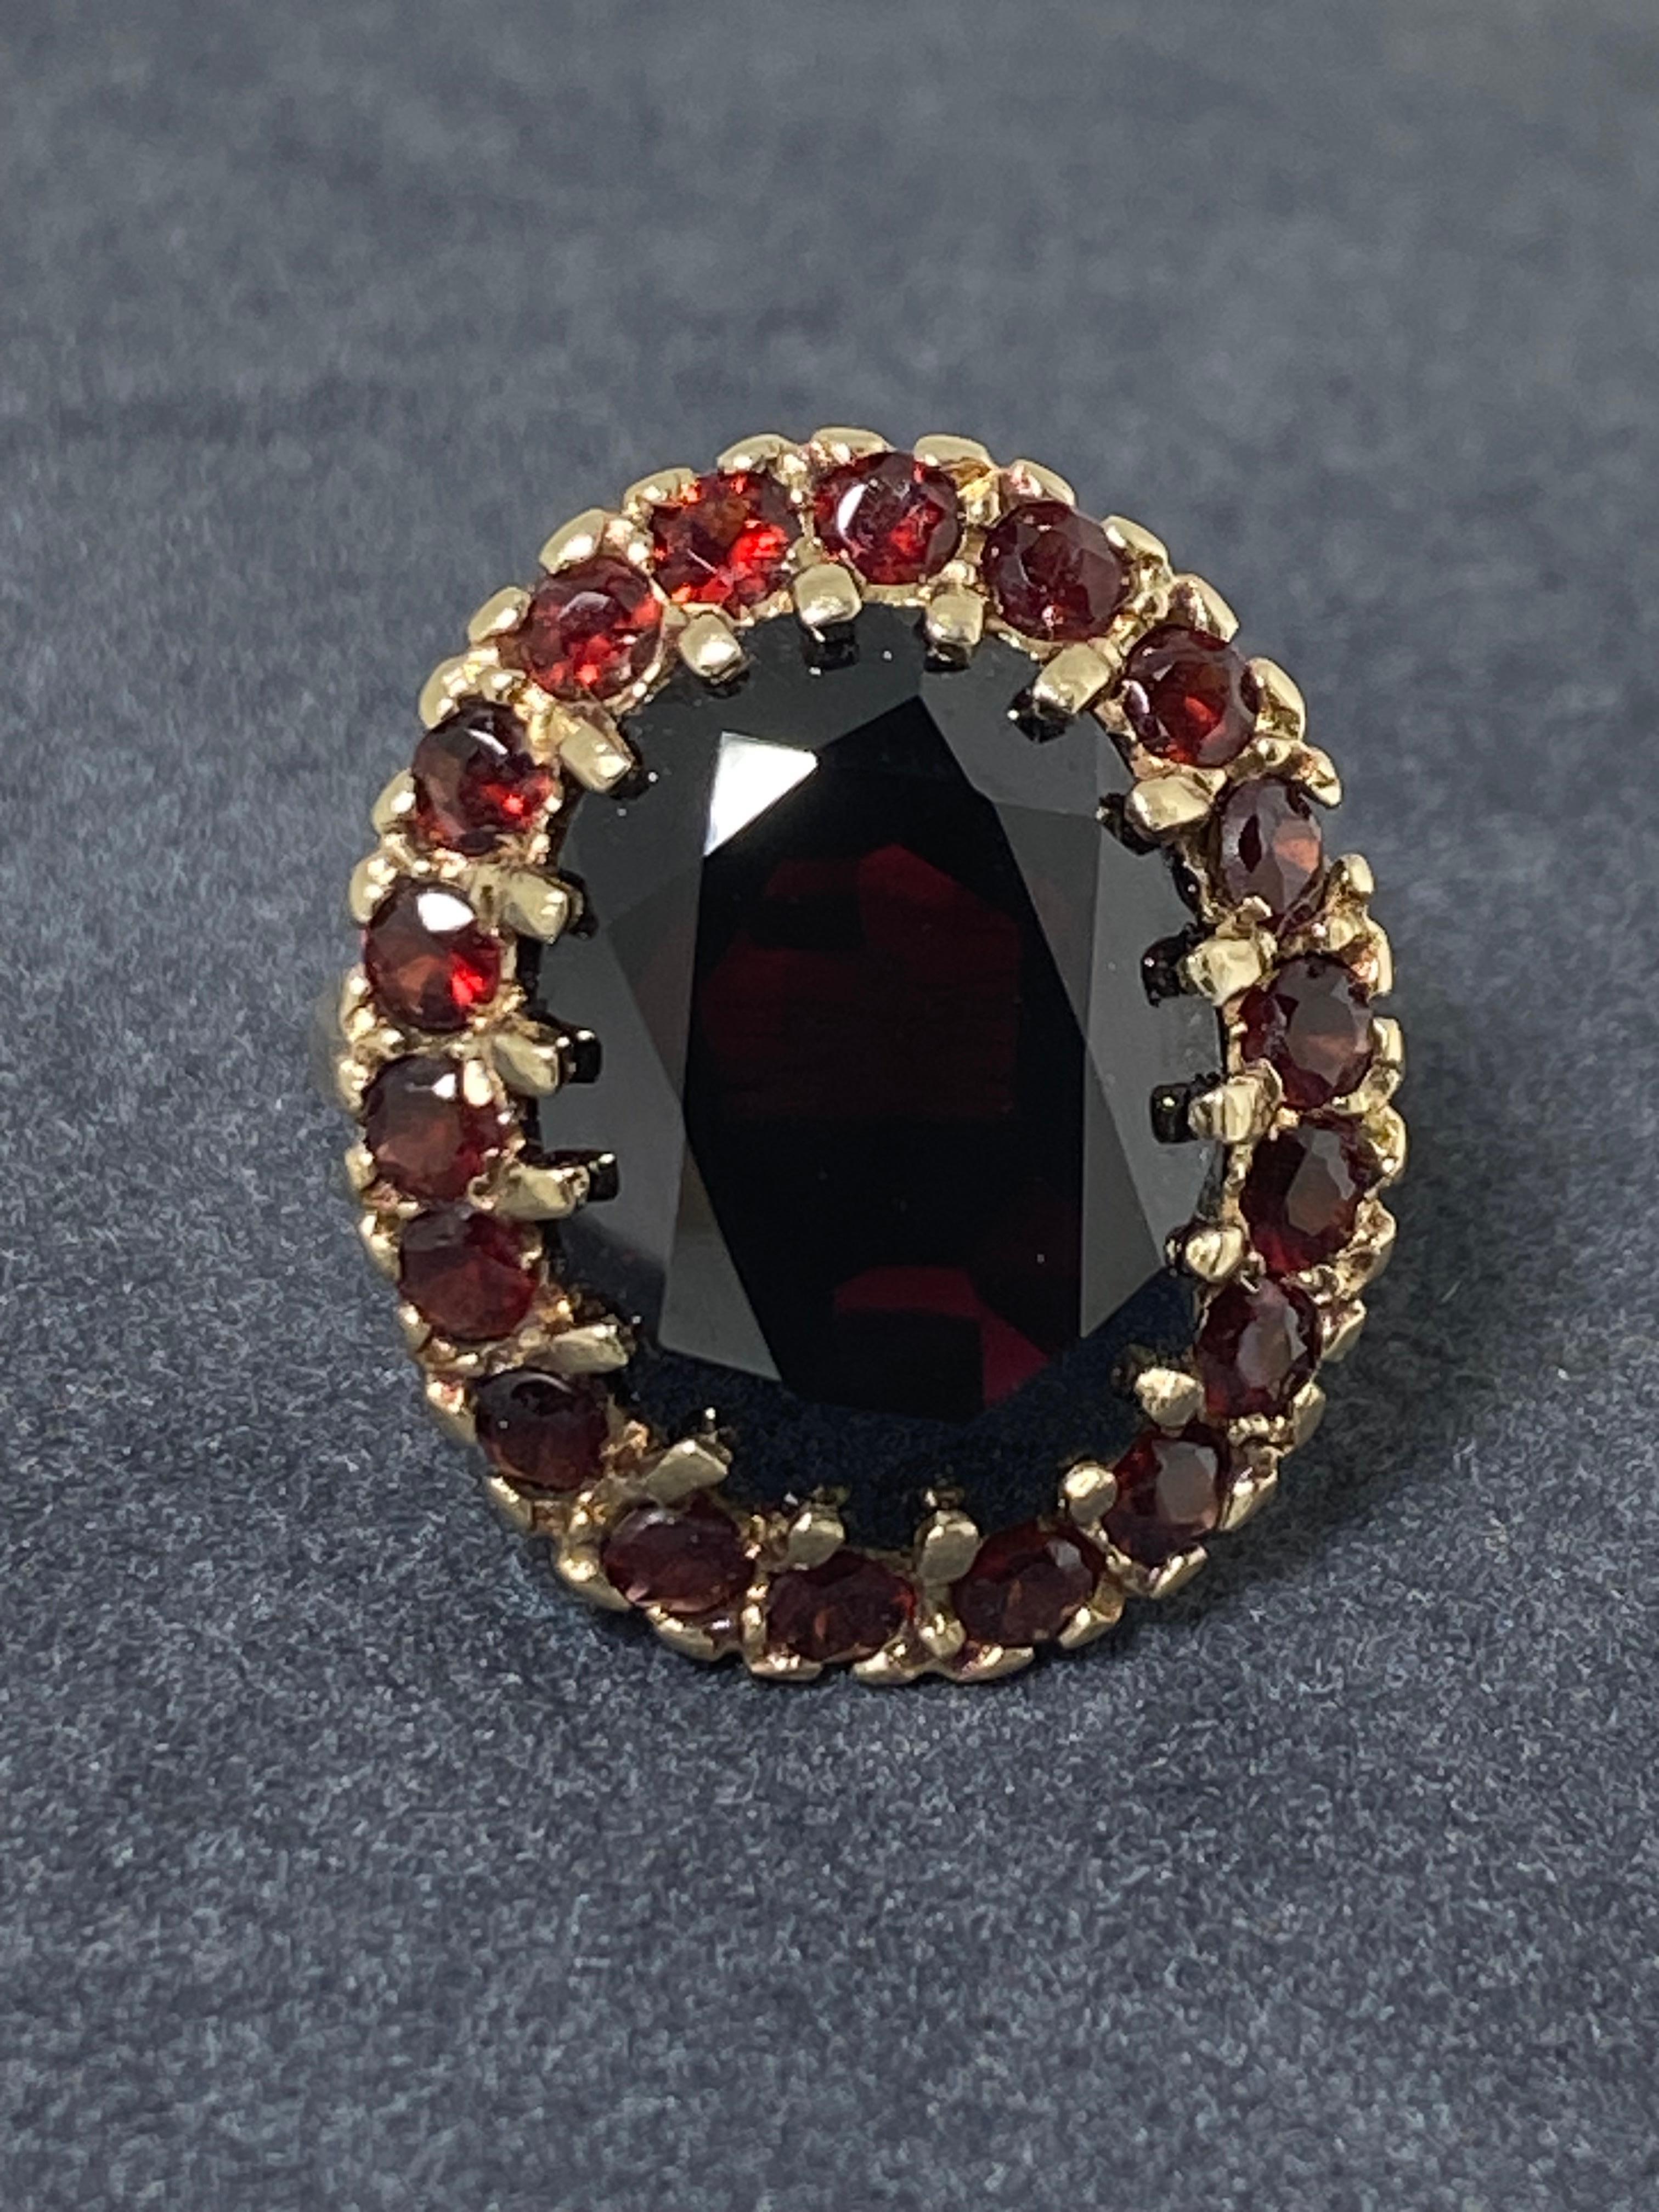 Dating back to an Edwardian era (c 1920's)
this cocktail ring survived 
in remarkable condition 

~~~

Centering a Natural Garnet of top quality, 
of 12.50ct approx. 
(17mm x 13mm)
of intense & deep cherry red colour;

securely claw set 
within a